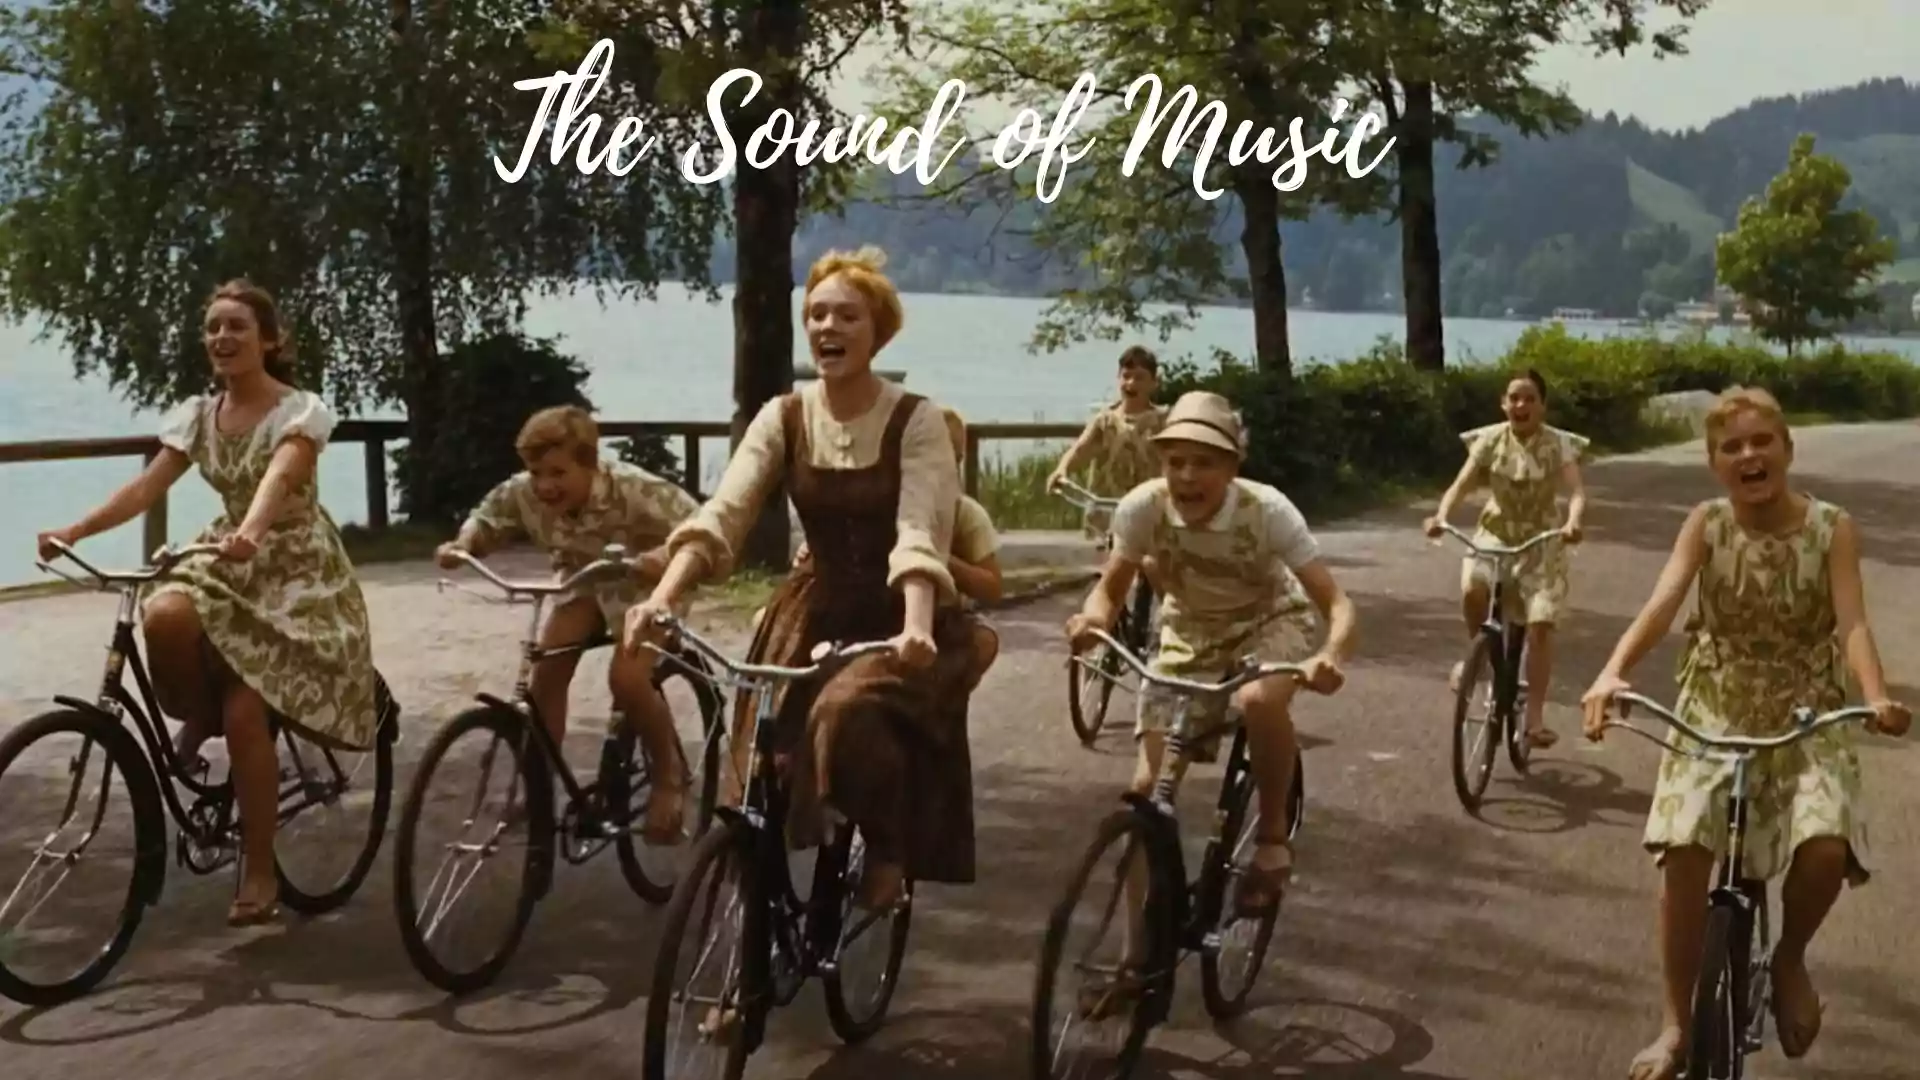 The Sound of Music wallpaper and image 3